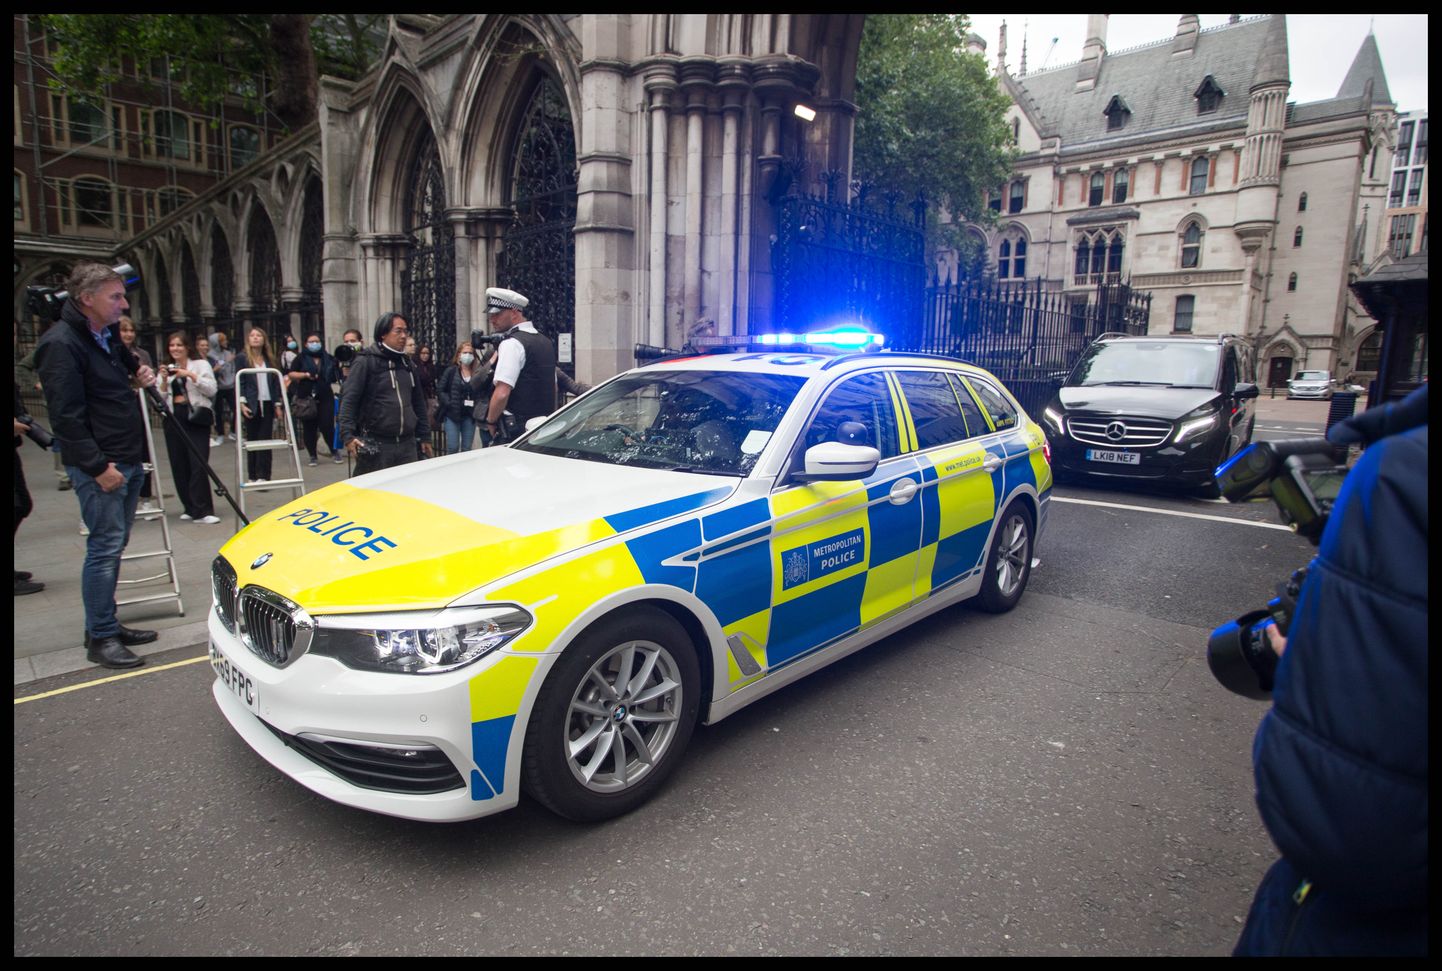 July 15, 2020, London, London, United Kingdom: Johnny Depp libel trial-Day Seven. ..Police escort Amber HeardÃ•s vehicle away from the Royal Courts of Justice following day seven of the Johnny Depp libel trial. (Credit Image: © Martyn Wheatley/i-Images via ZUMA Press)